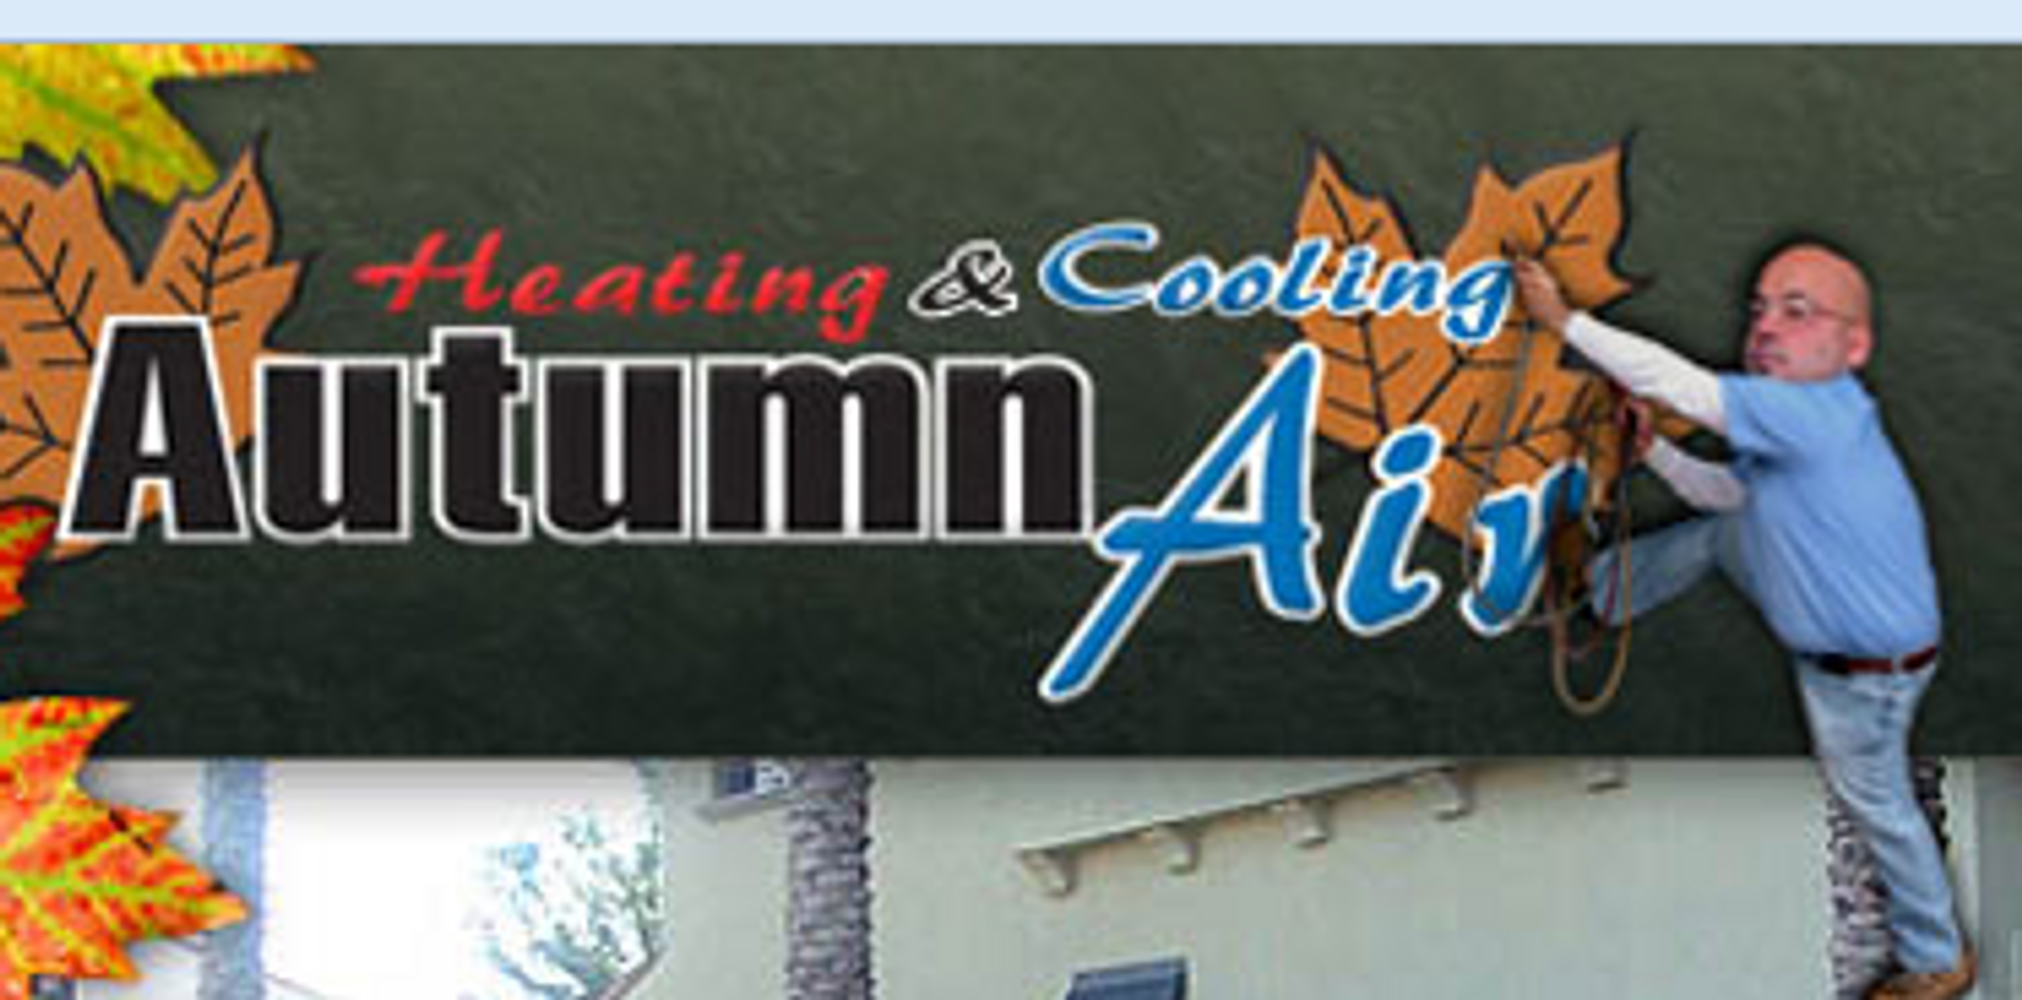 Photo(s) from Autumn Air Heating & Cooling